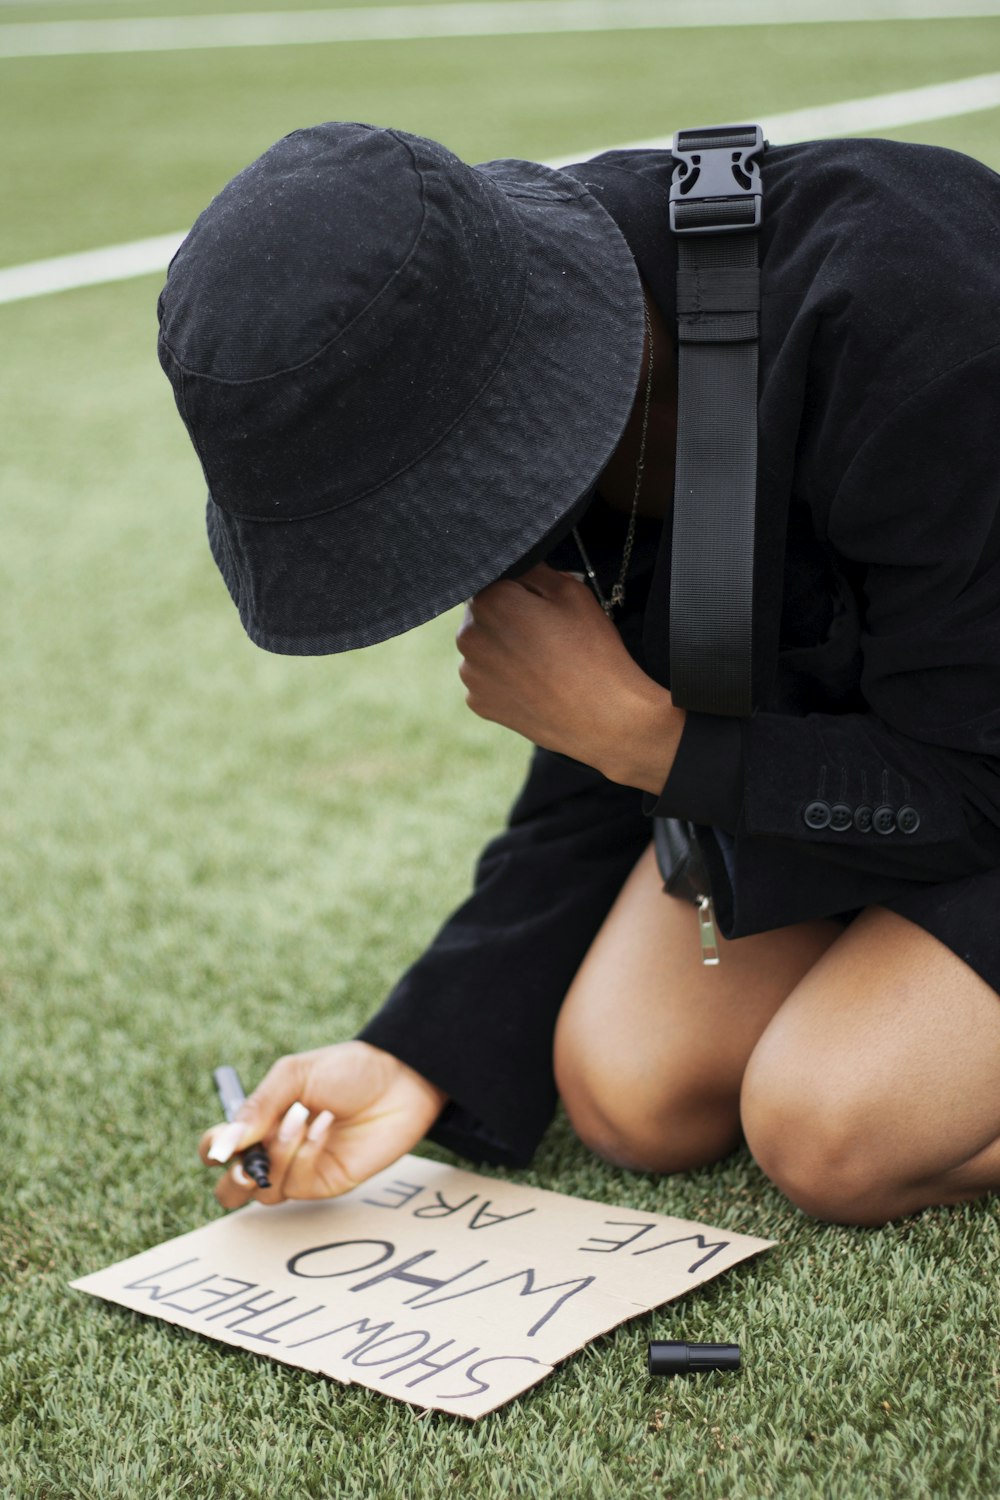 woman in black hat and black t-shirt sitting on green grass field during daytime